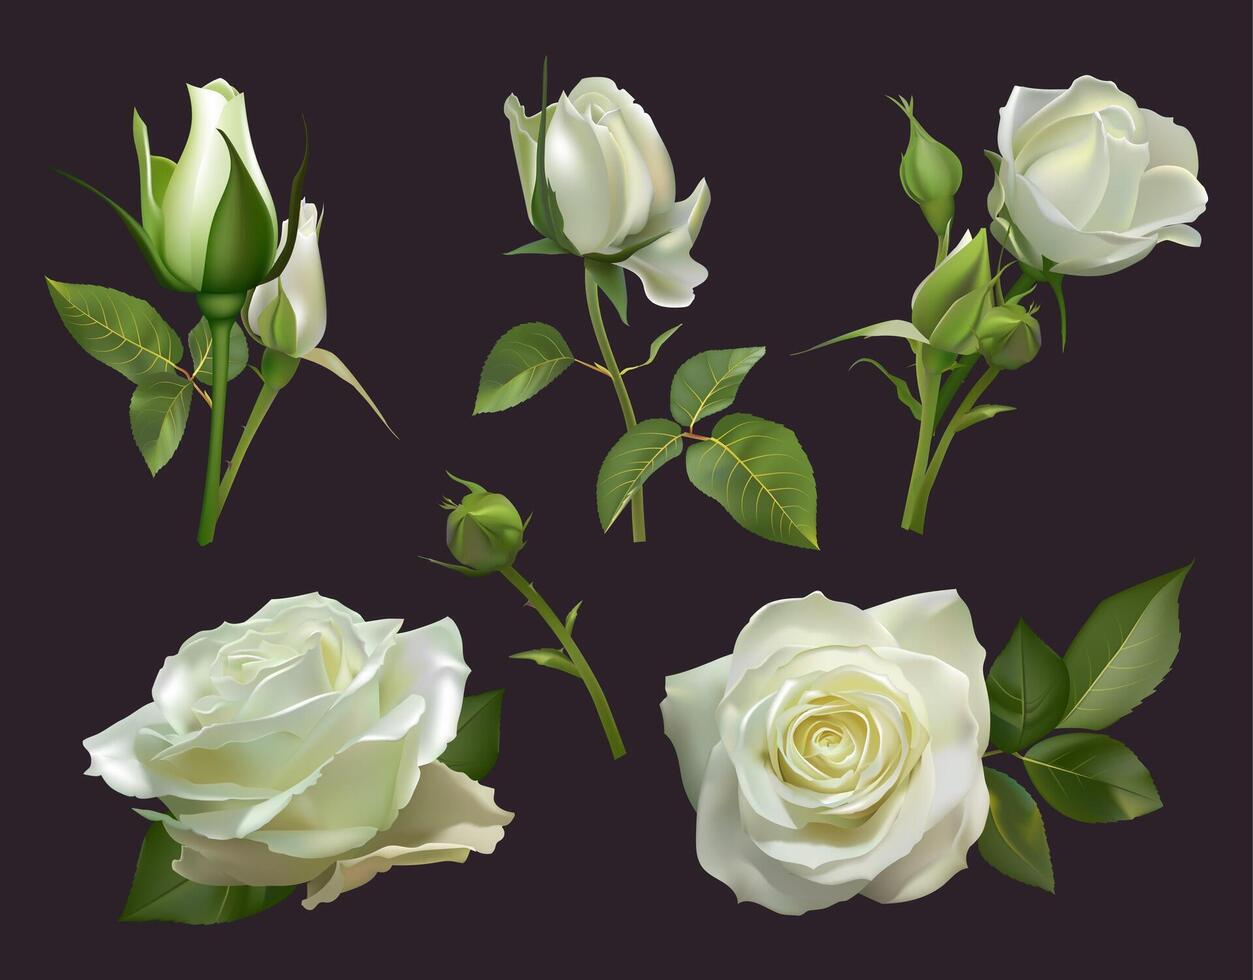 Realistic roses bouquet. White rose flowers with leaves, floral roses bouquets, gardening pastel colors blossom bunch vector illustration set